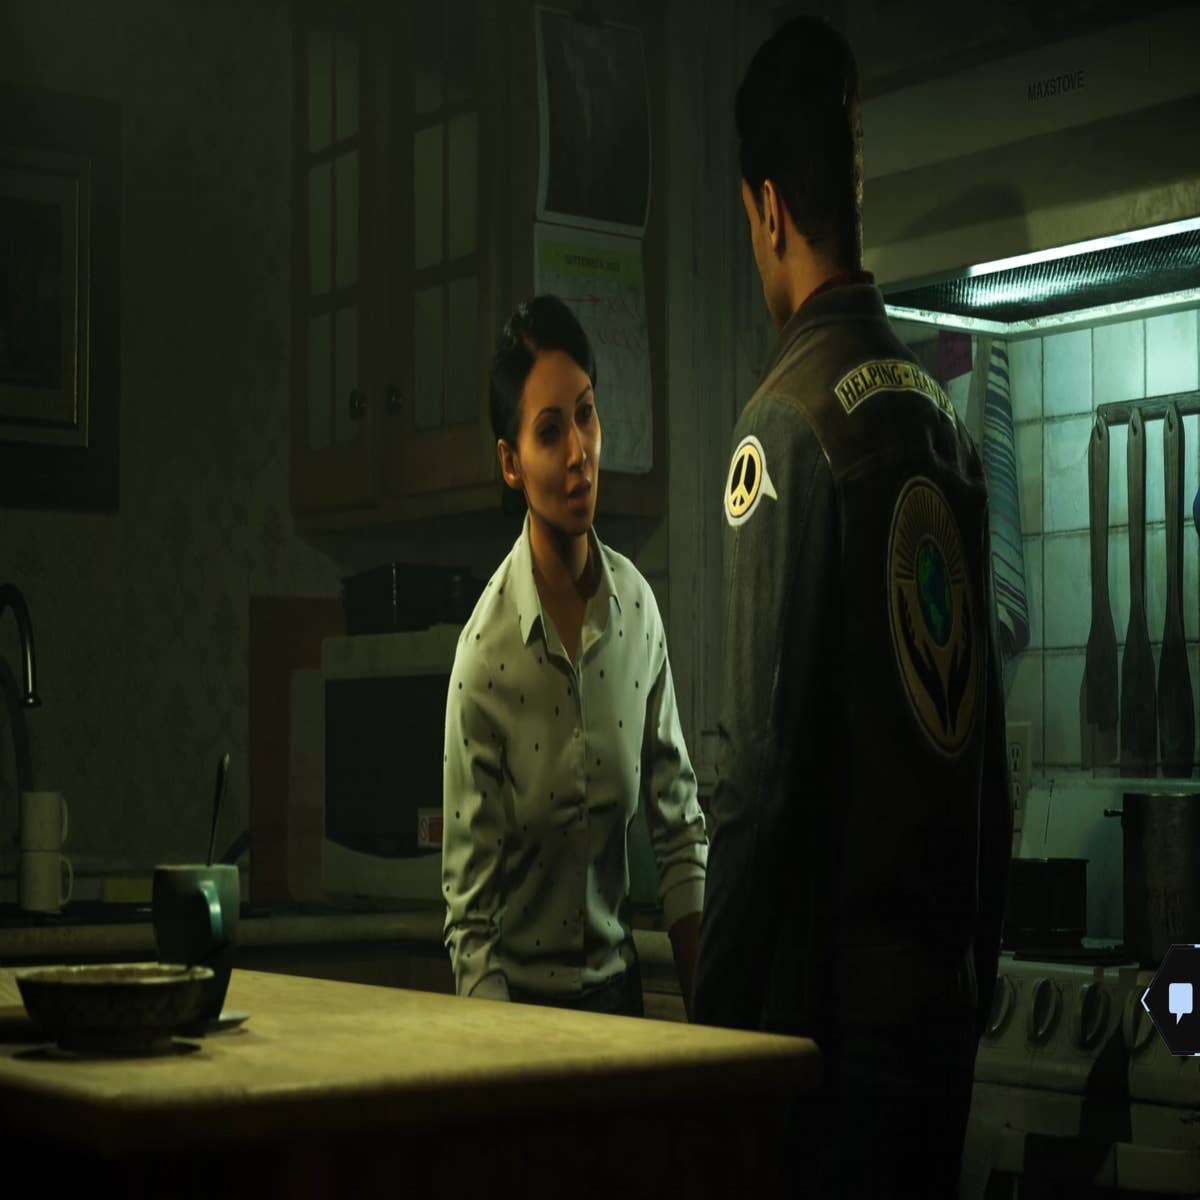 silent hill: Silent Hill 2 Remake: This is what we know so far about  release date, platforms, gameplay, storyline and more - The Economic Times